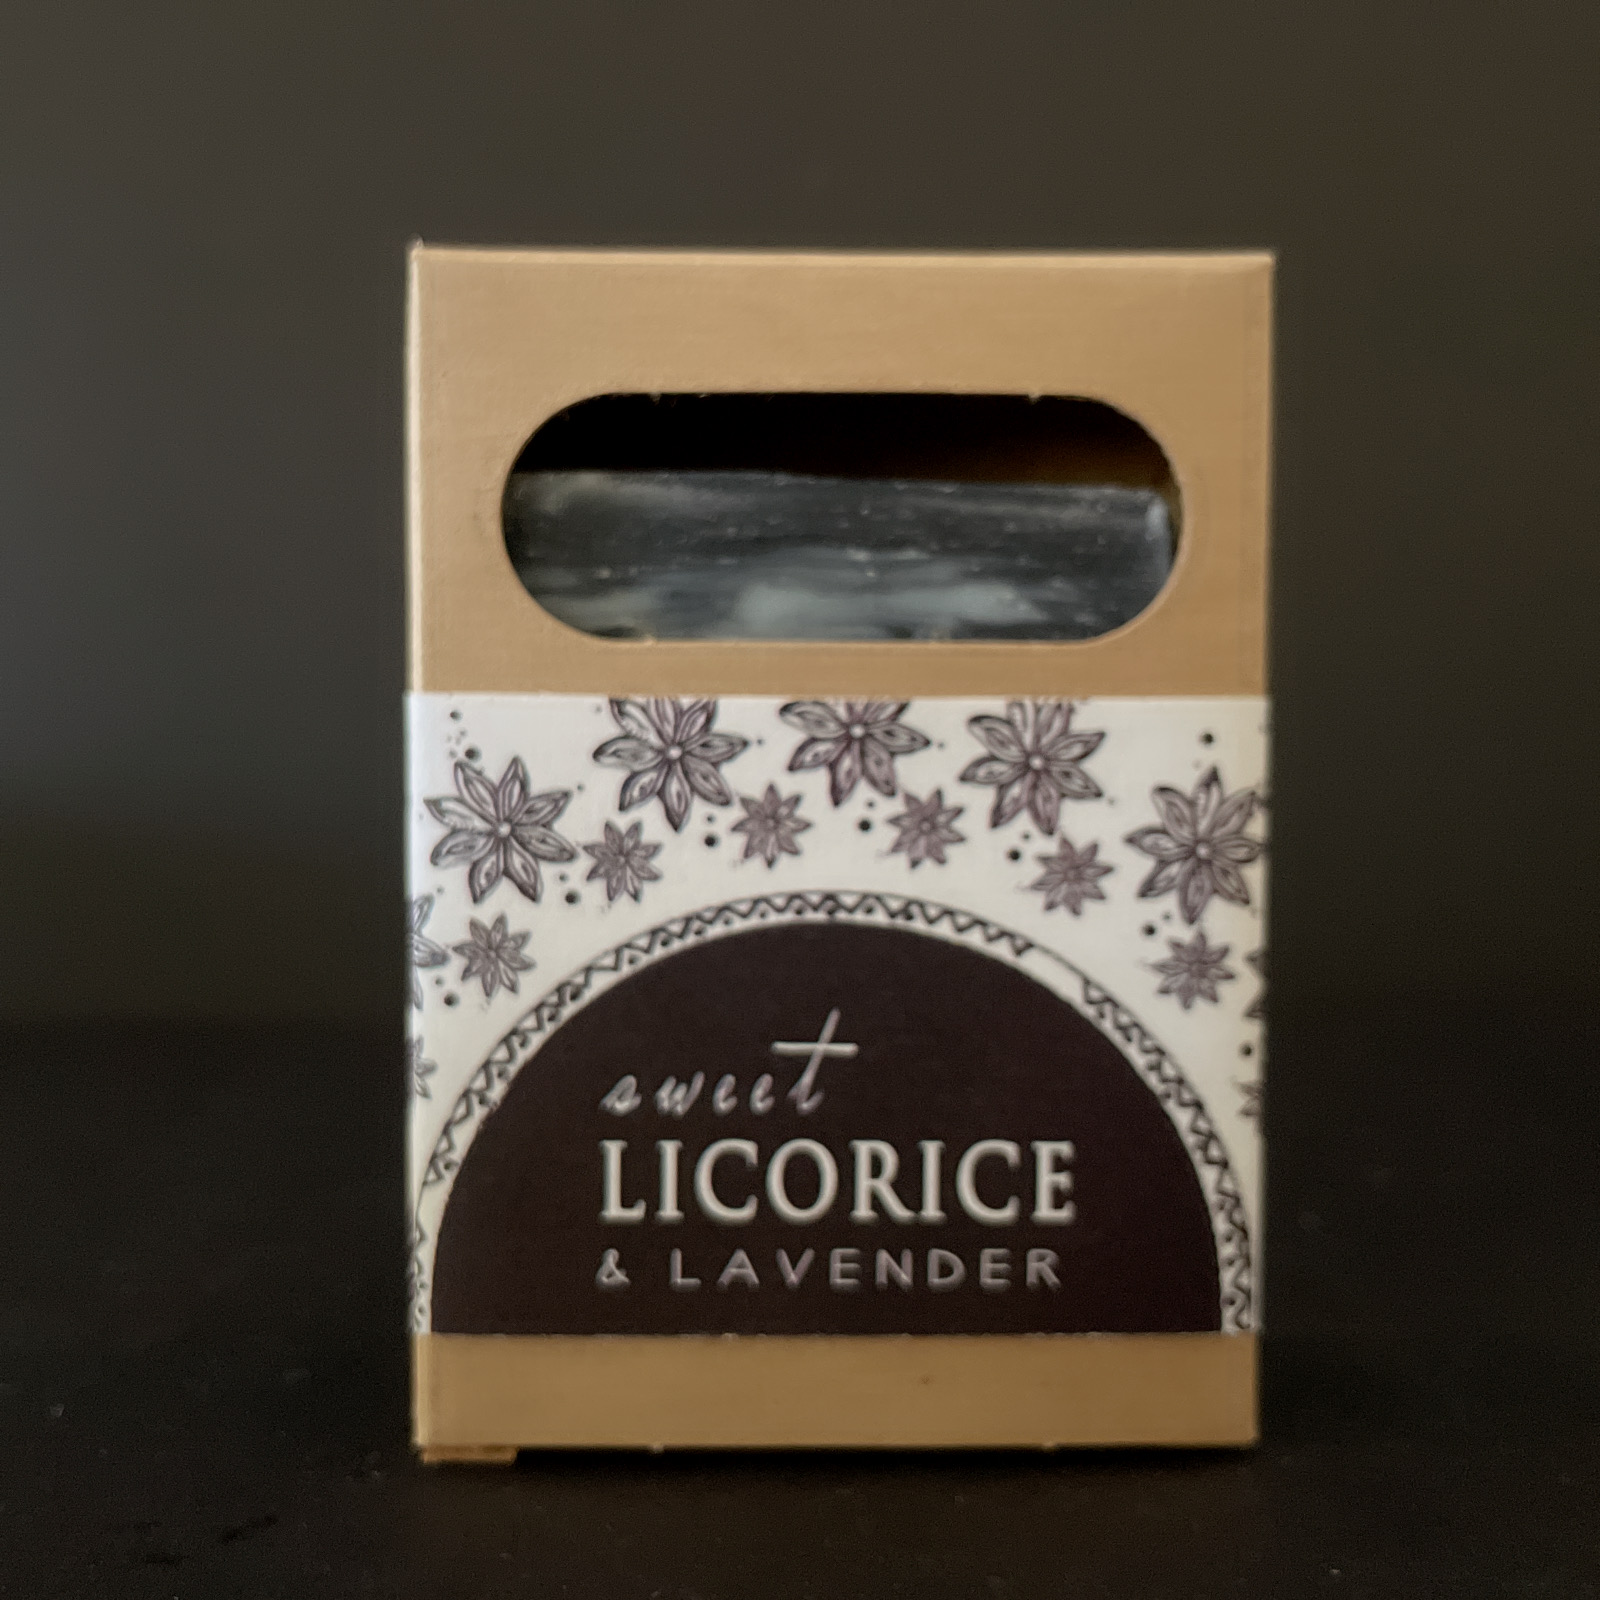 Jody's Naturals Soap: Sweet Licorice & Lavender